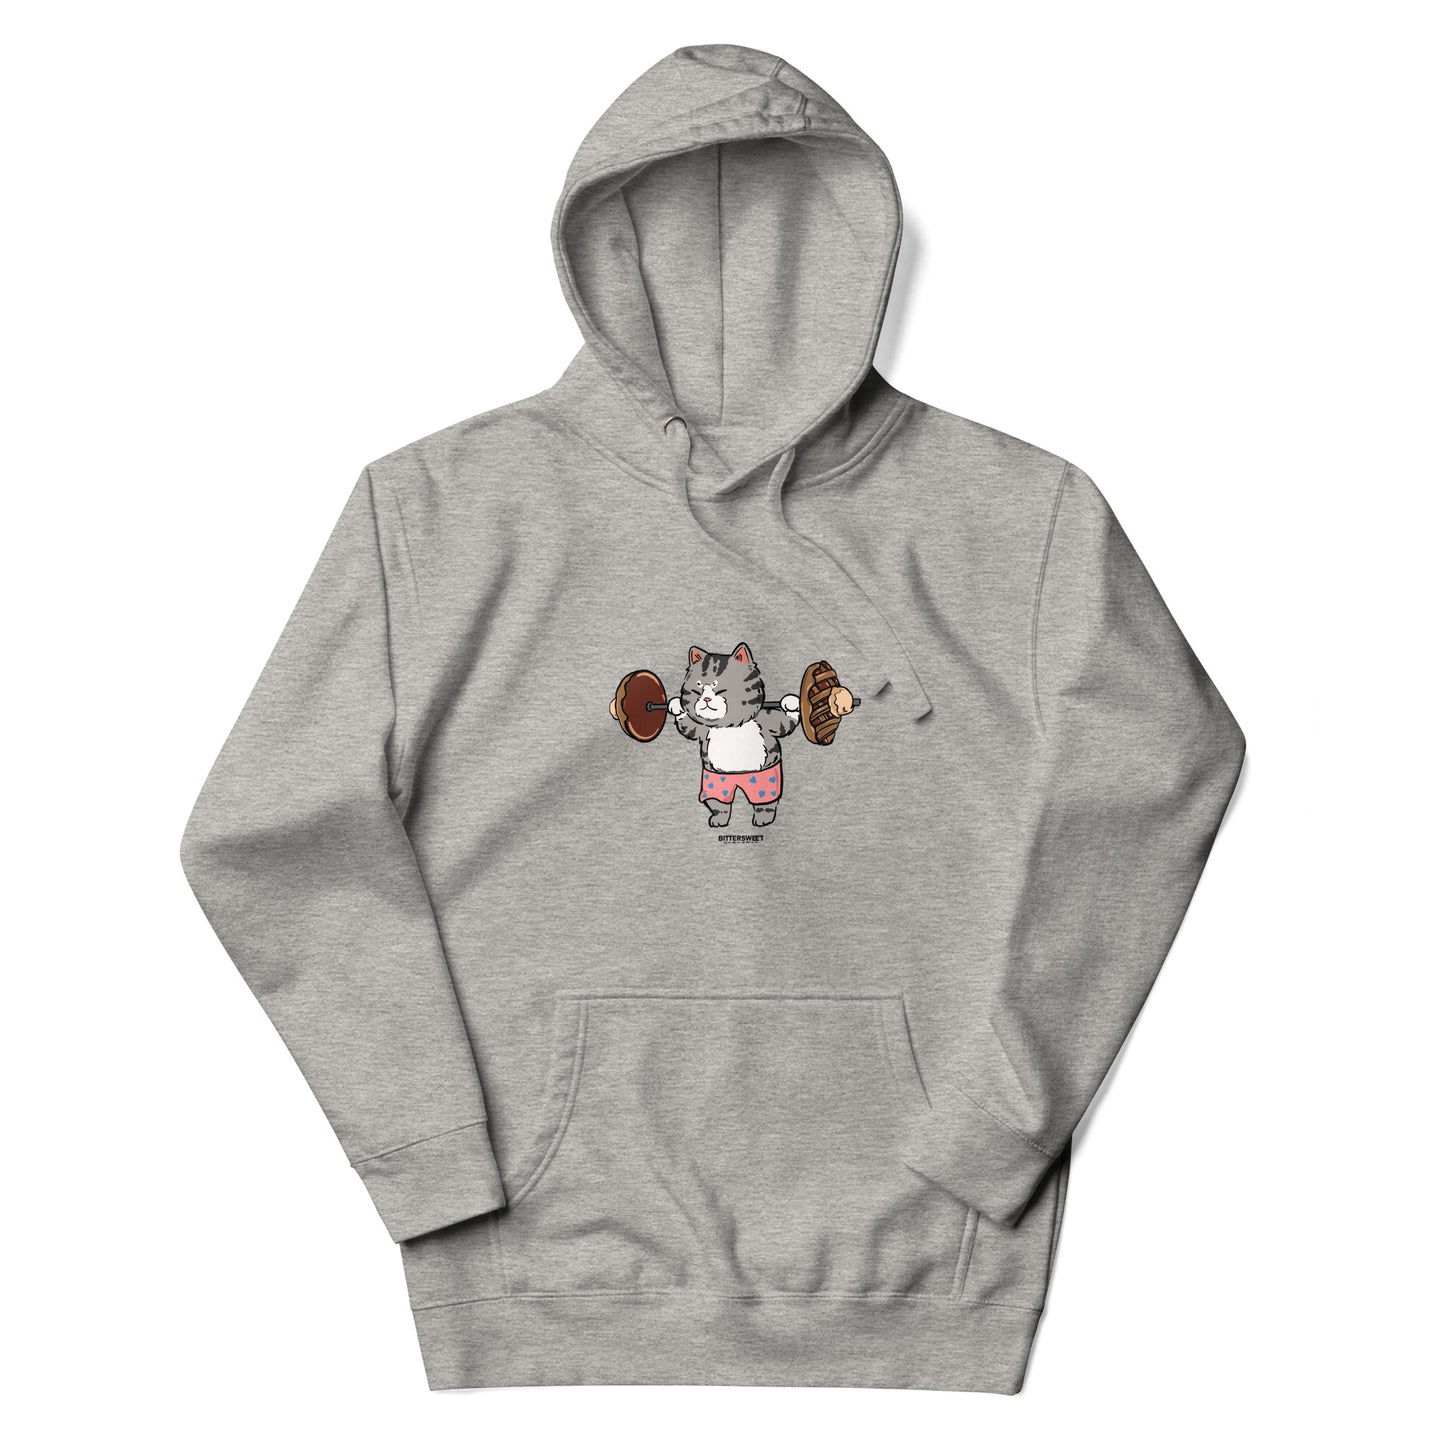 Funny cat graphic heavyweight Gym Hoodie